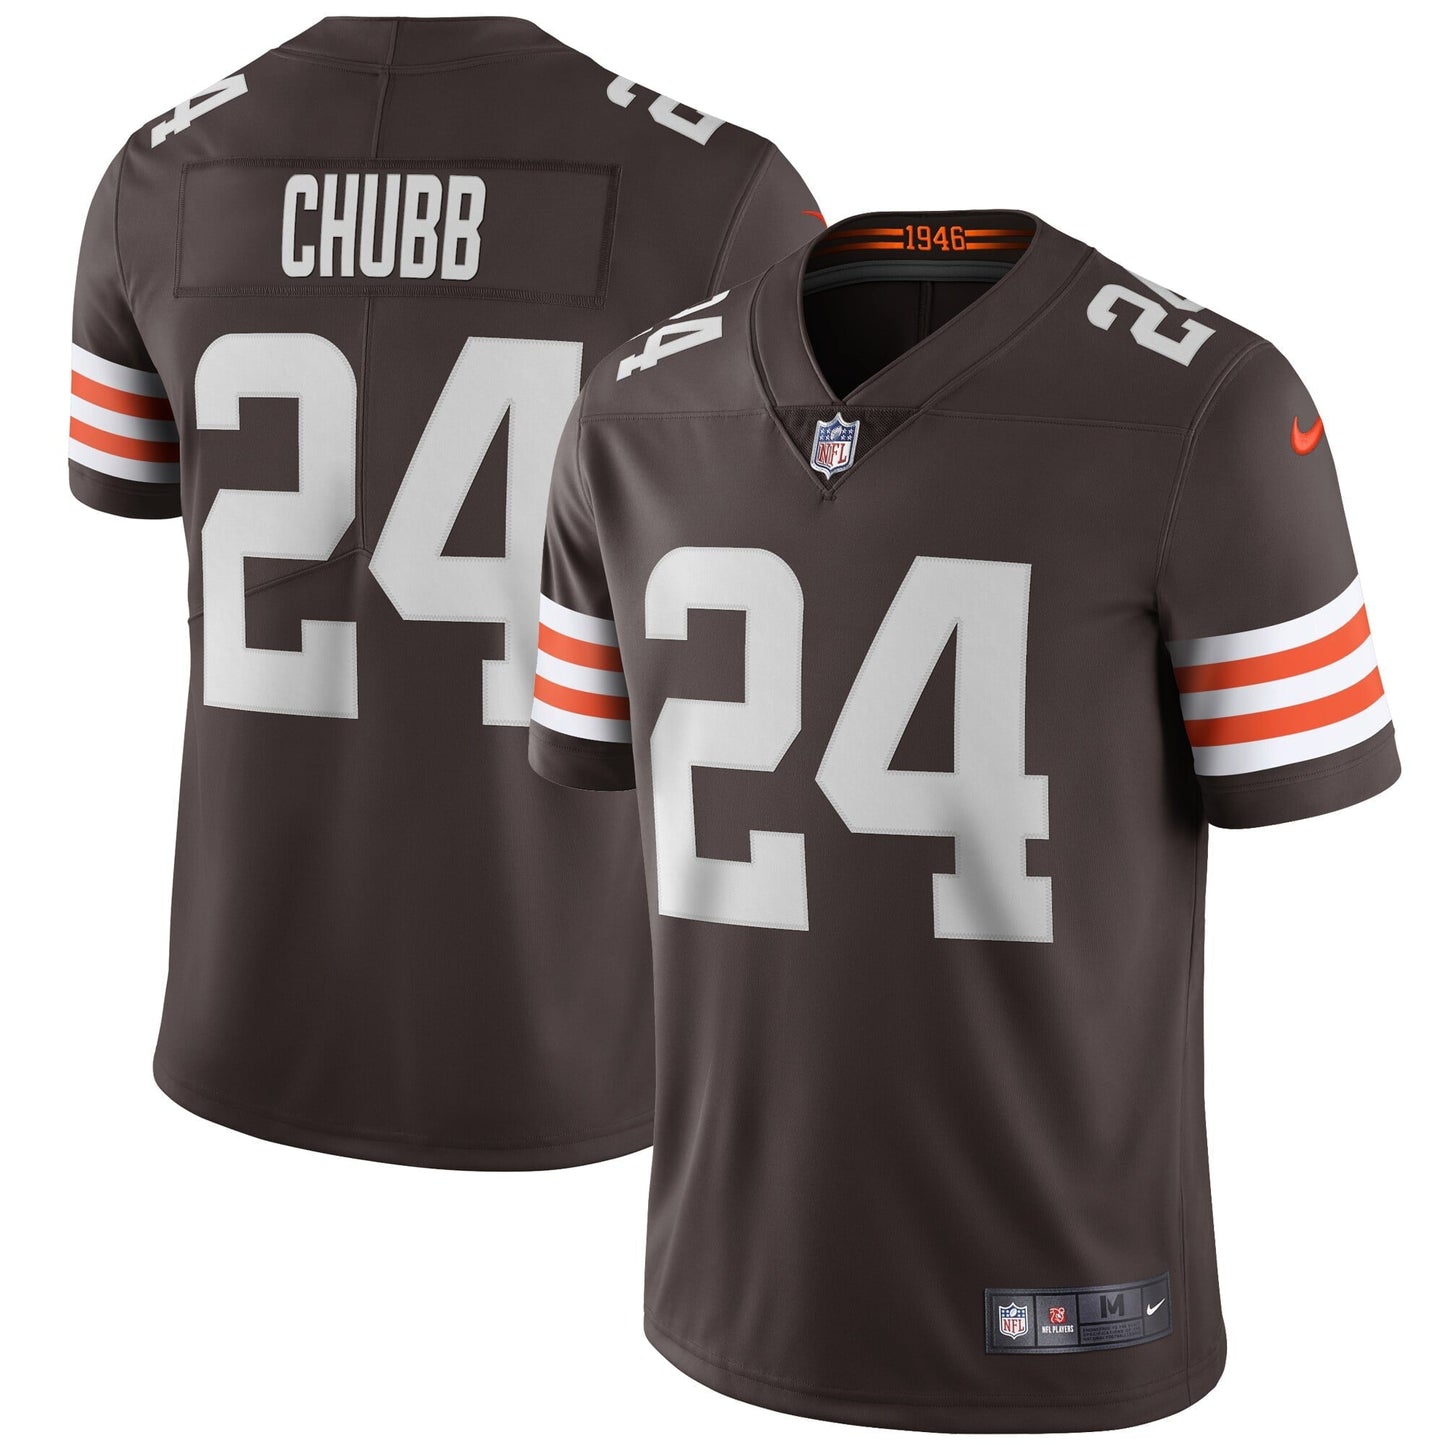 Men's Nike Nick Chubb Brown Cleveland Browns Vapor Limited Jersey